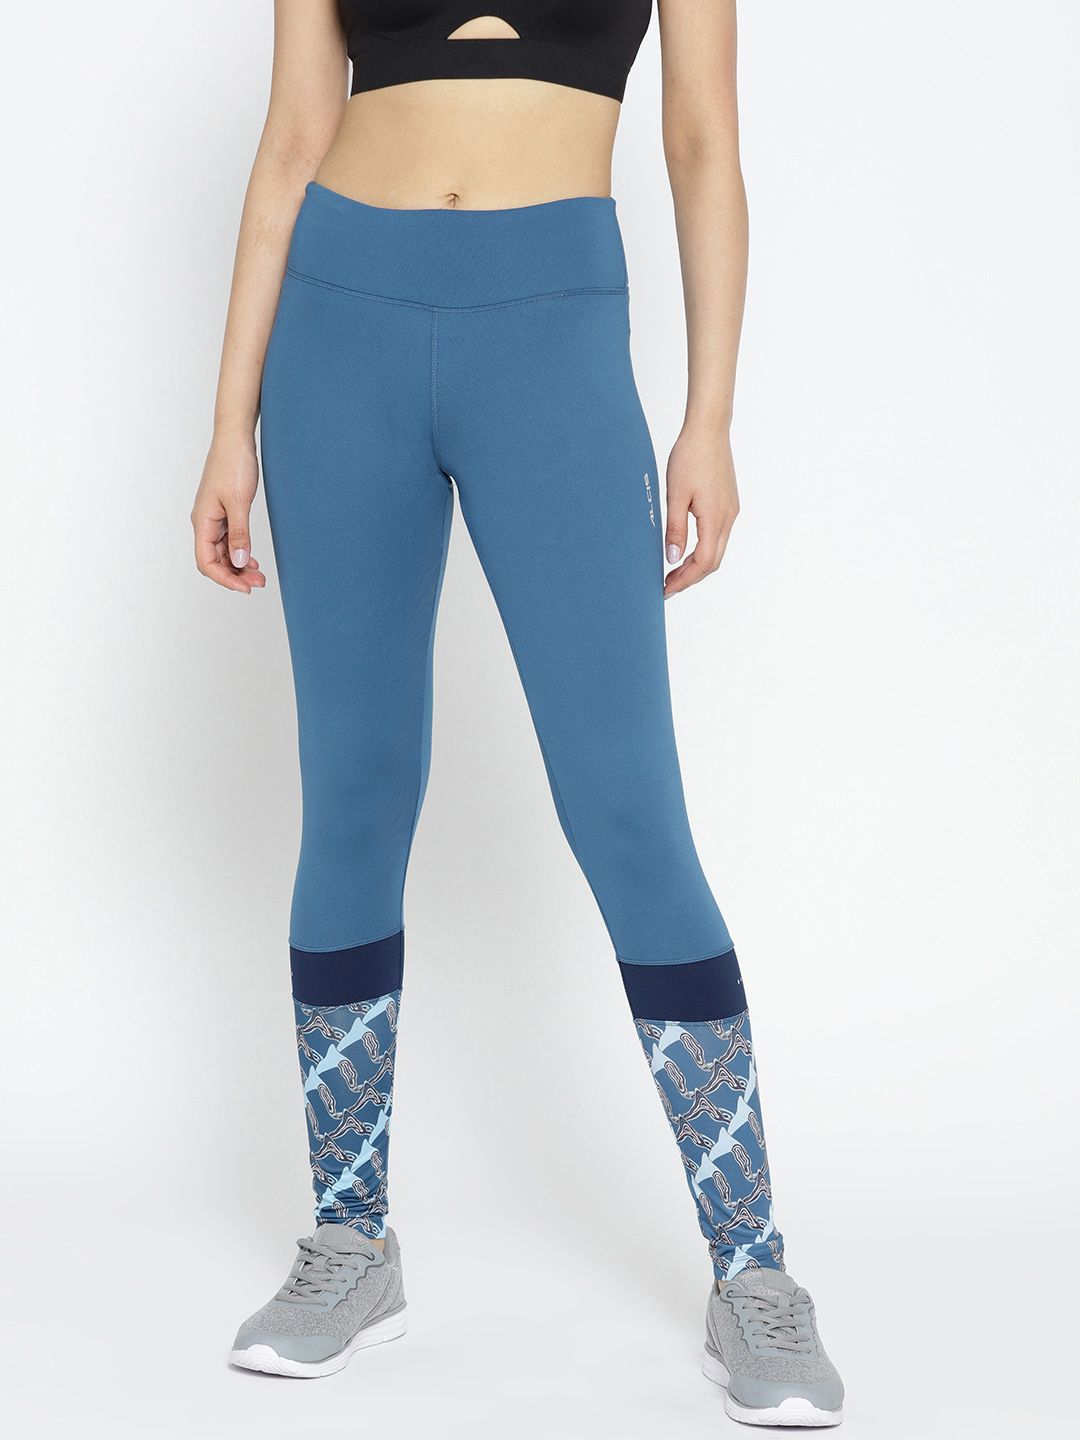 Alcis Women Teal Blue Solid Running Tights with Printed Detail Price in India